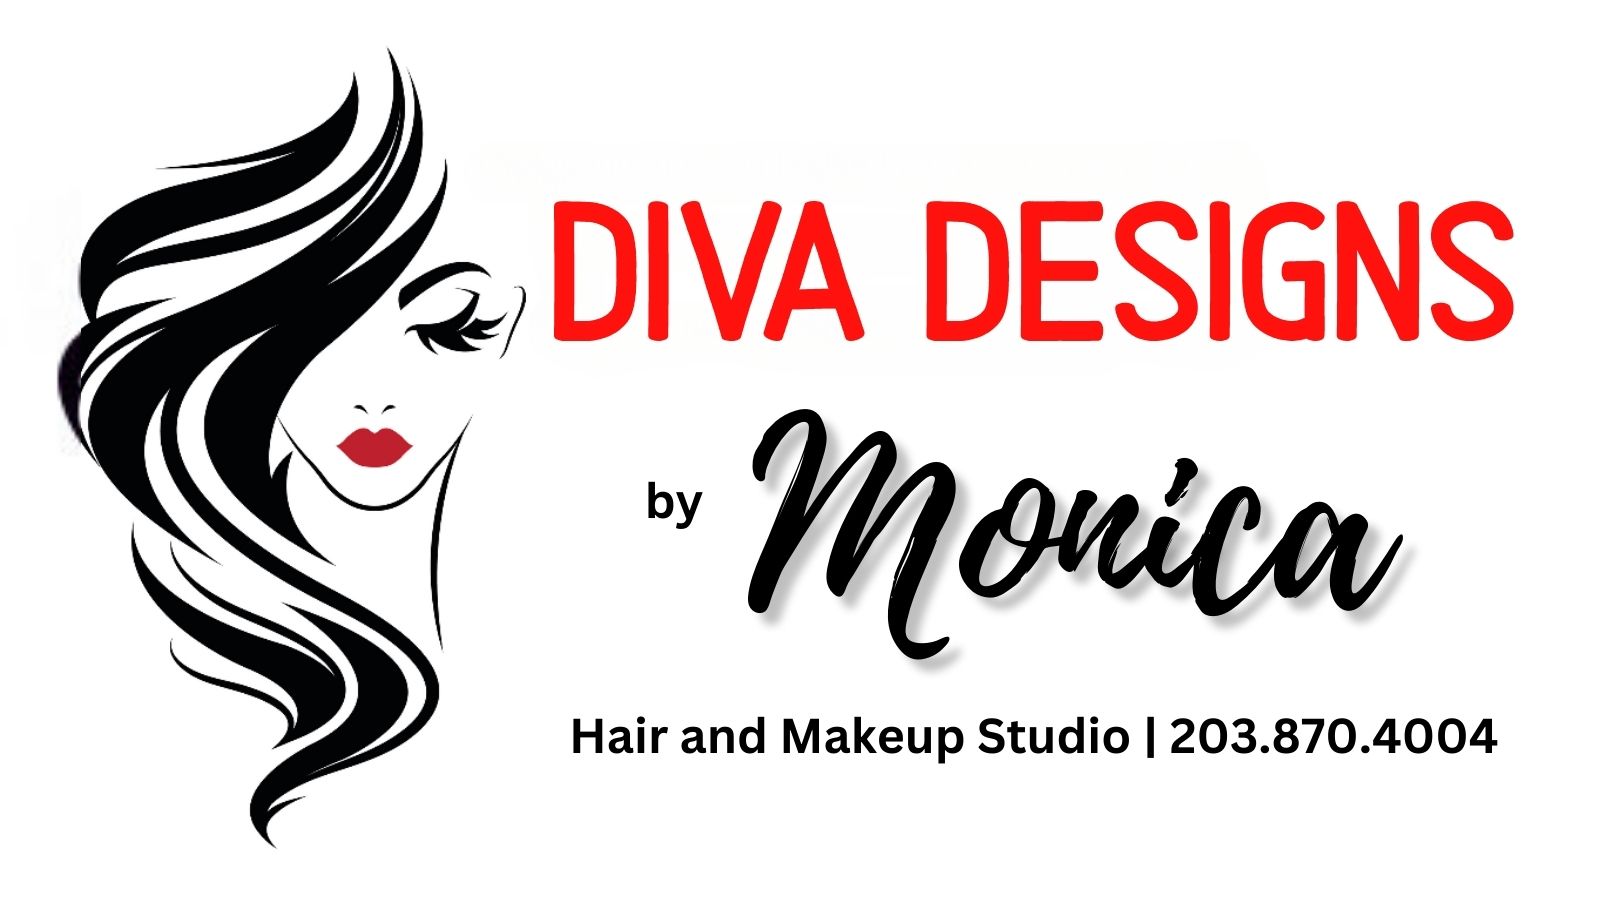 Diva Designs by Monica - Hair and Makeup Studio - Stratford CT